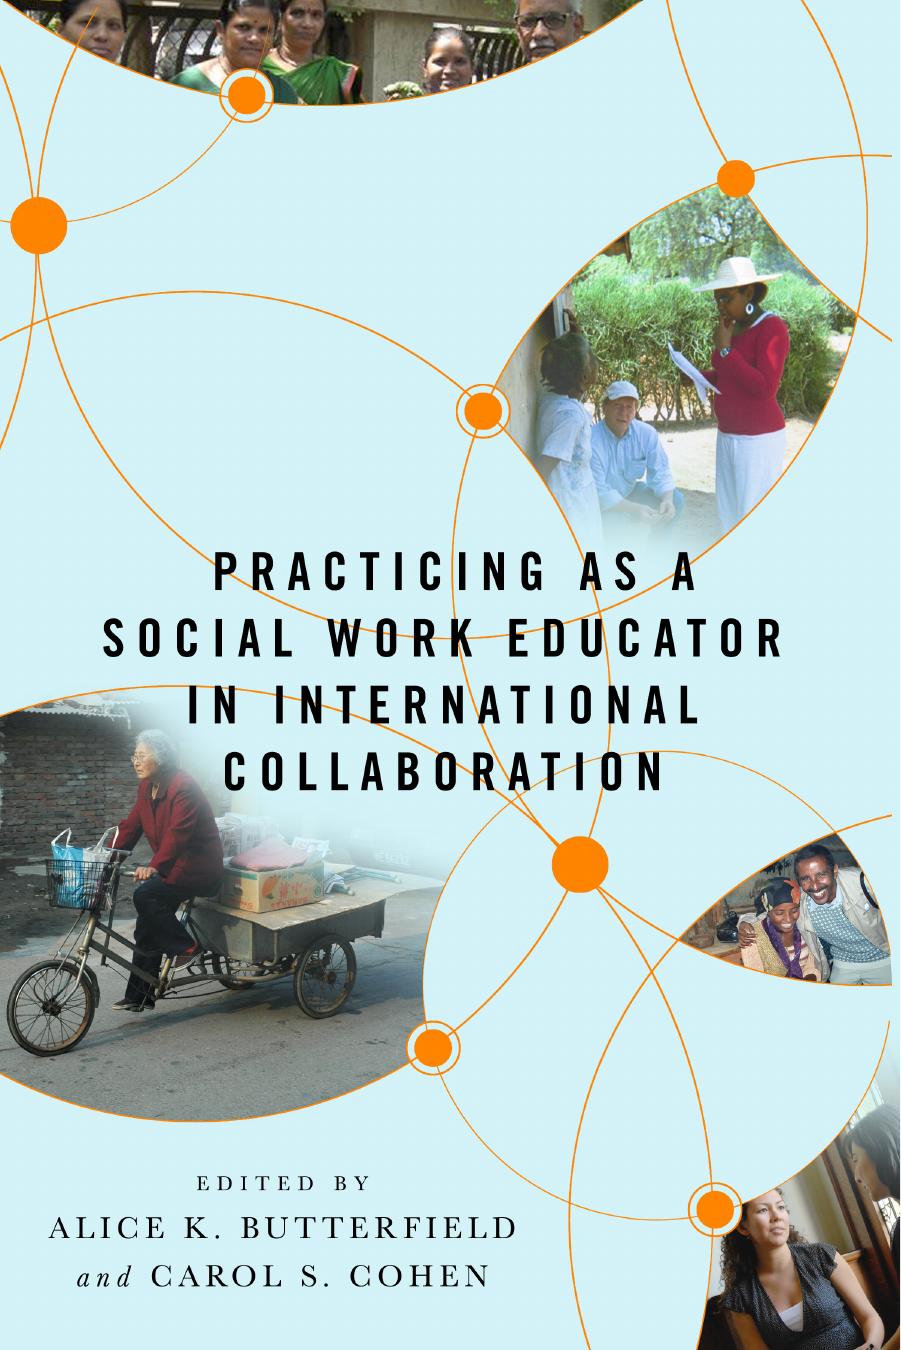 Practicing As a Social Work Educator in International Collaboration by Alice K. Butterfield; Carol S. Cohen